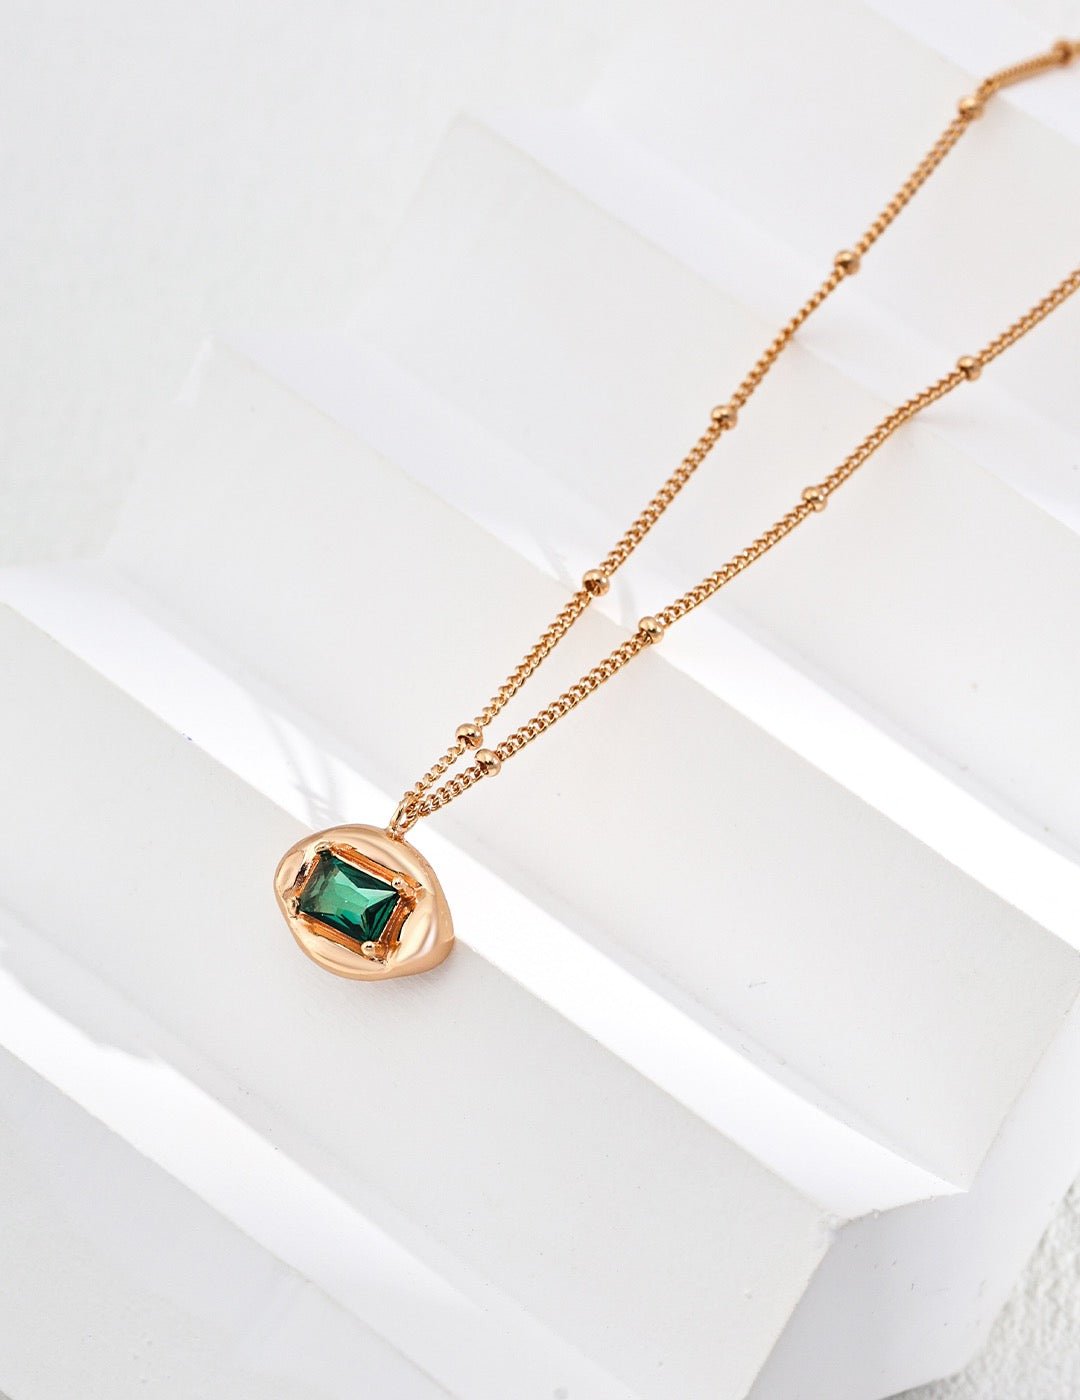 Meet Yana, Sterling Silver Gold Vermeil Zircon Necklace - Crystal Together